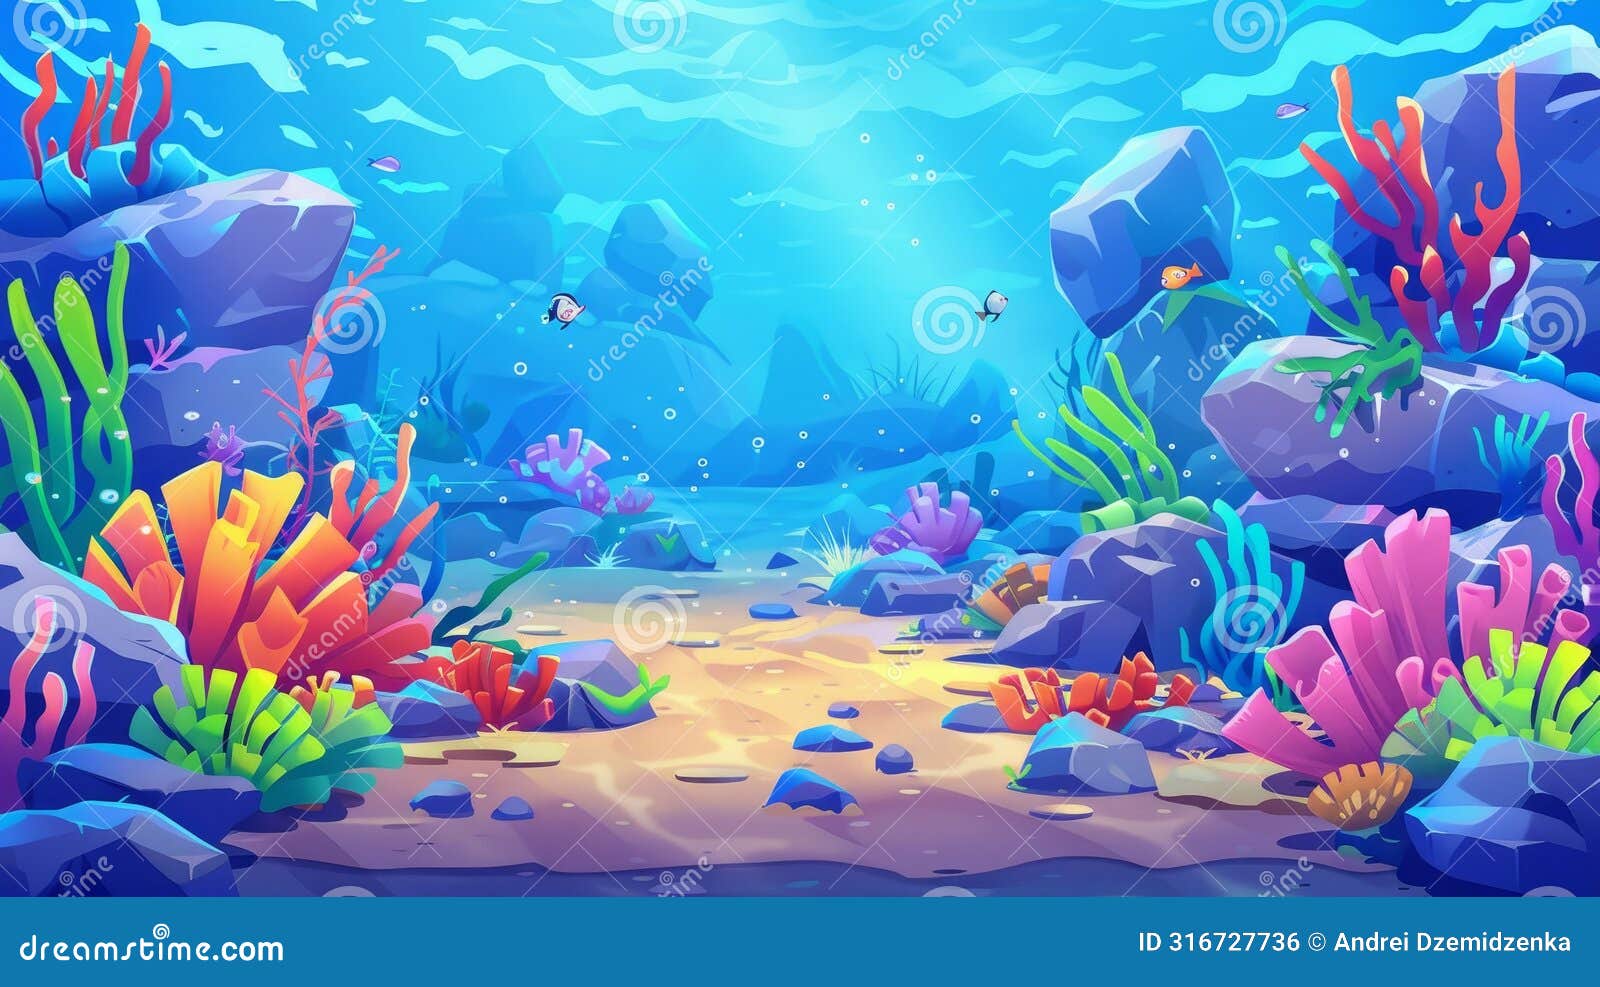 ocean bottom landscape with stones, corals, seaweed, tropical animals, and plants on the seafloor. modern cartoon